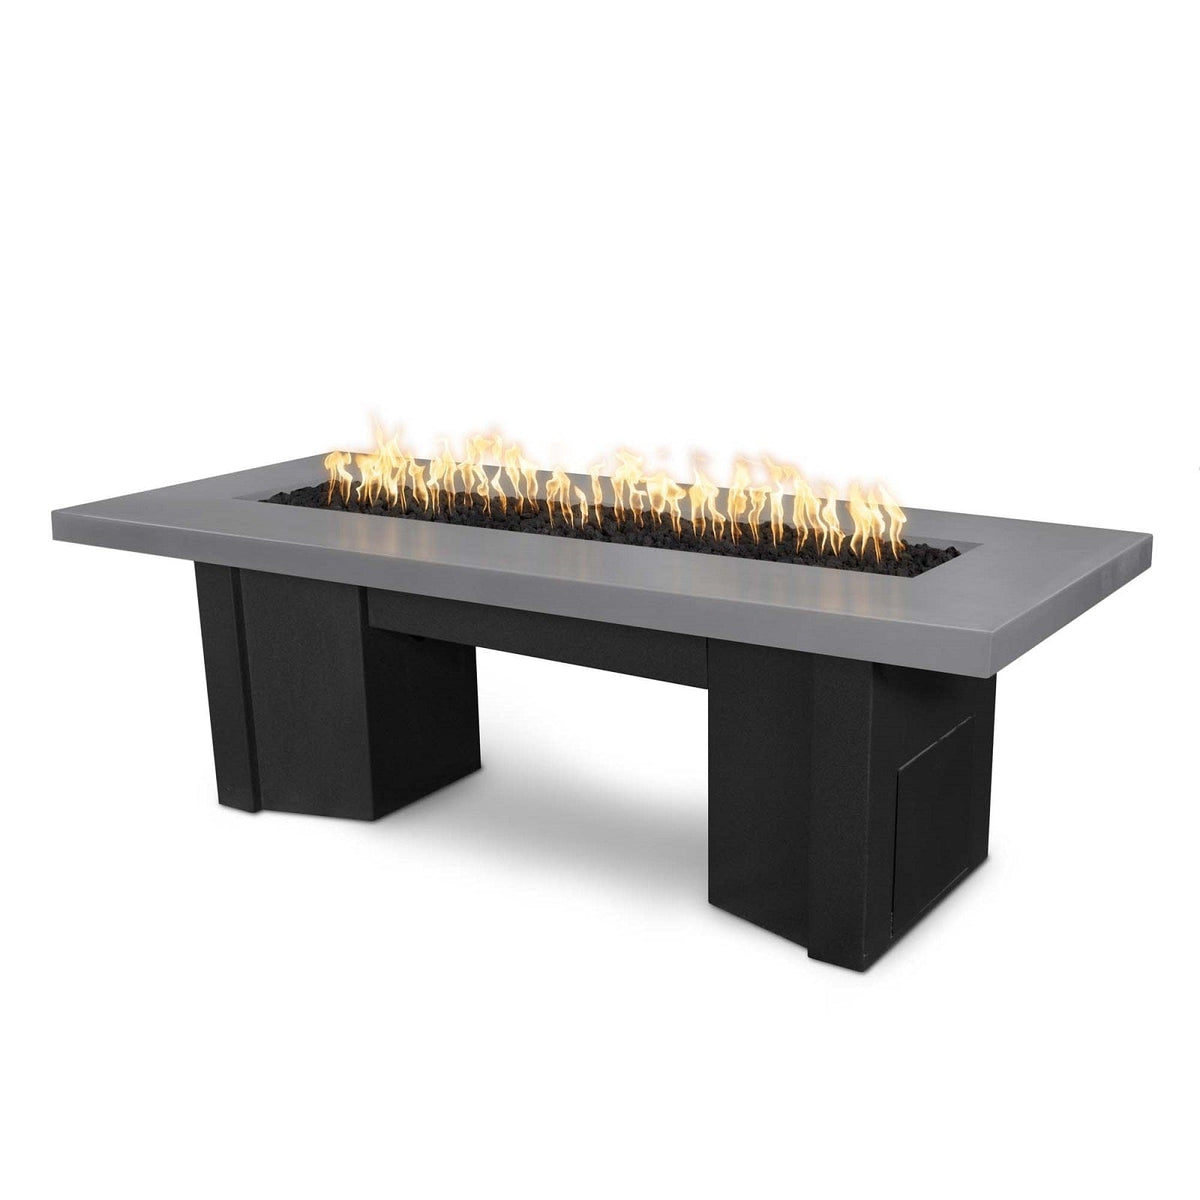 The Outdoor Plus Fire Features Natural Gray (-NGY) / Black Powder Coated Steel (-BLK) The Outdoor Plus 78&quot; Alameda Fire Table Smooth Concrete in Liquid Propane - 12V Electronic Ignition / OPT-ALMGFRC78E12V-LP